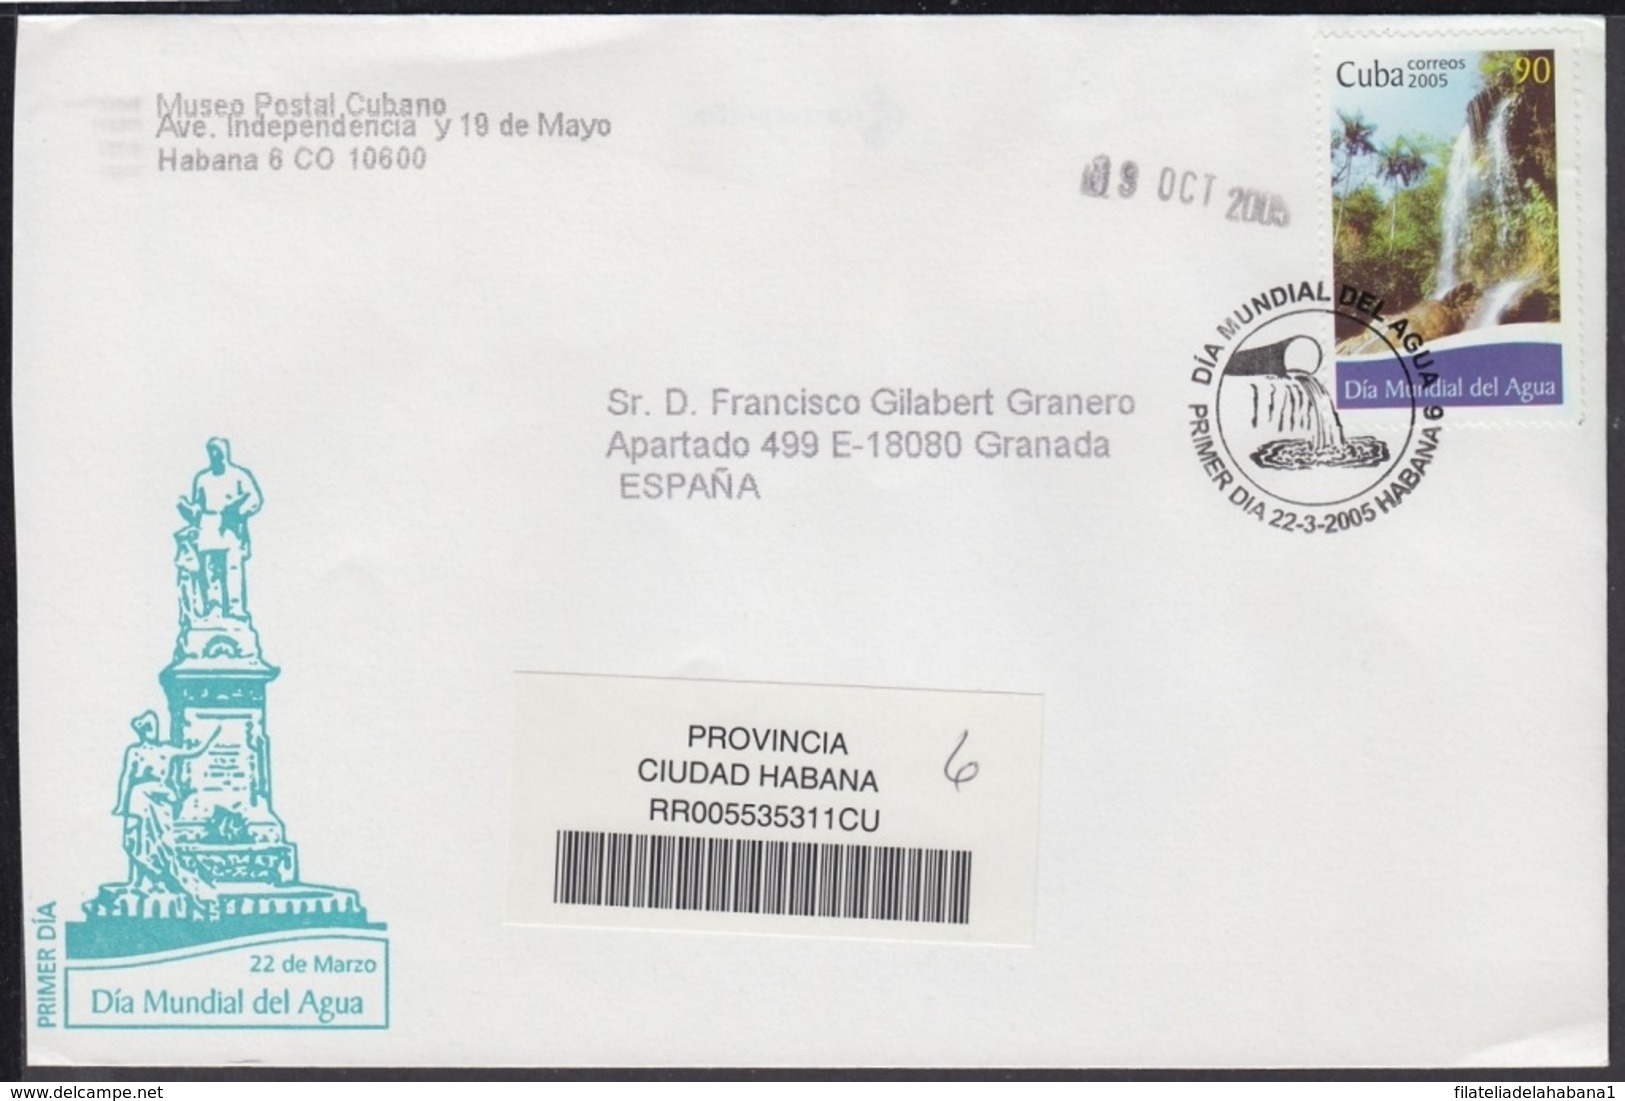 2005-FDC-69 CUBA FDC 2005. REGISTERED COVER TO SPAIN. DIA MUNDIAL DEL AGUA, WATER DAY. - FDC